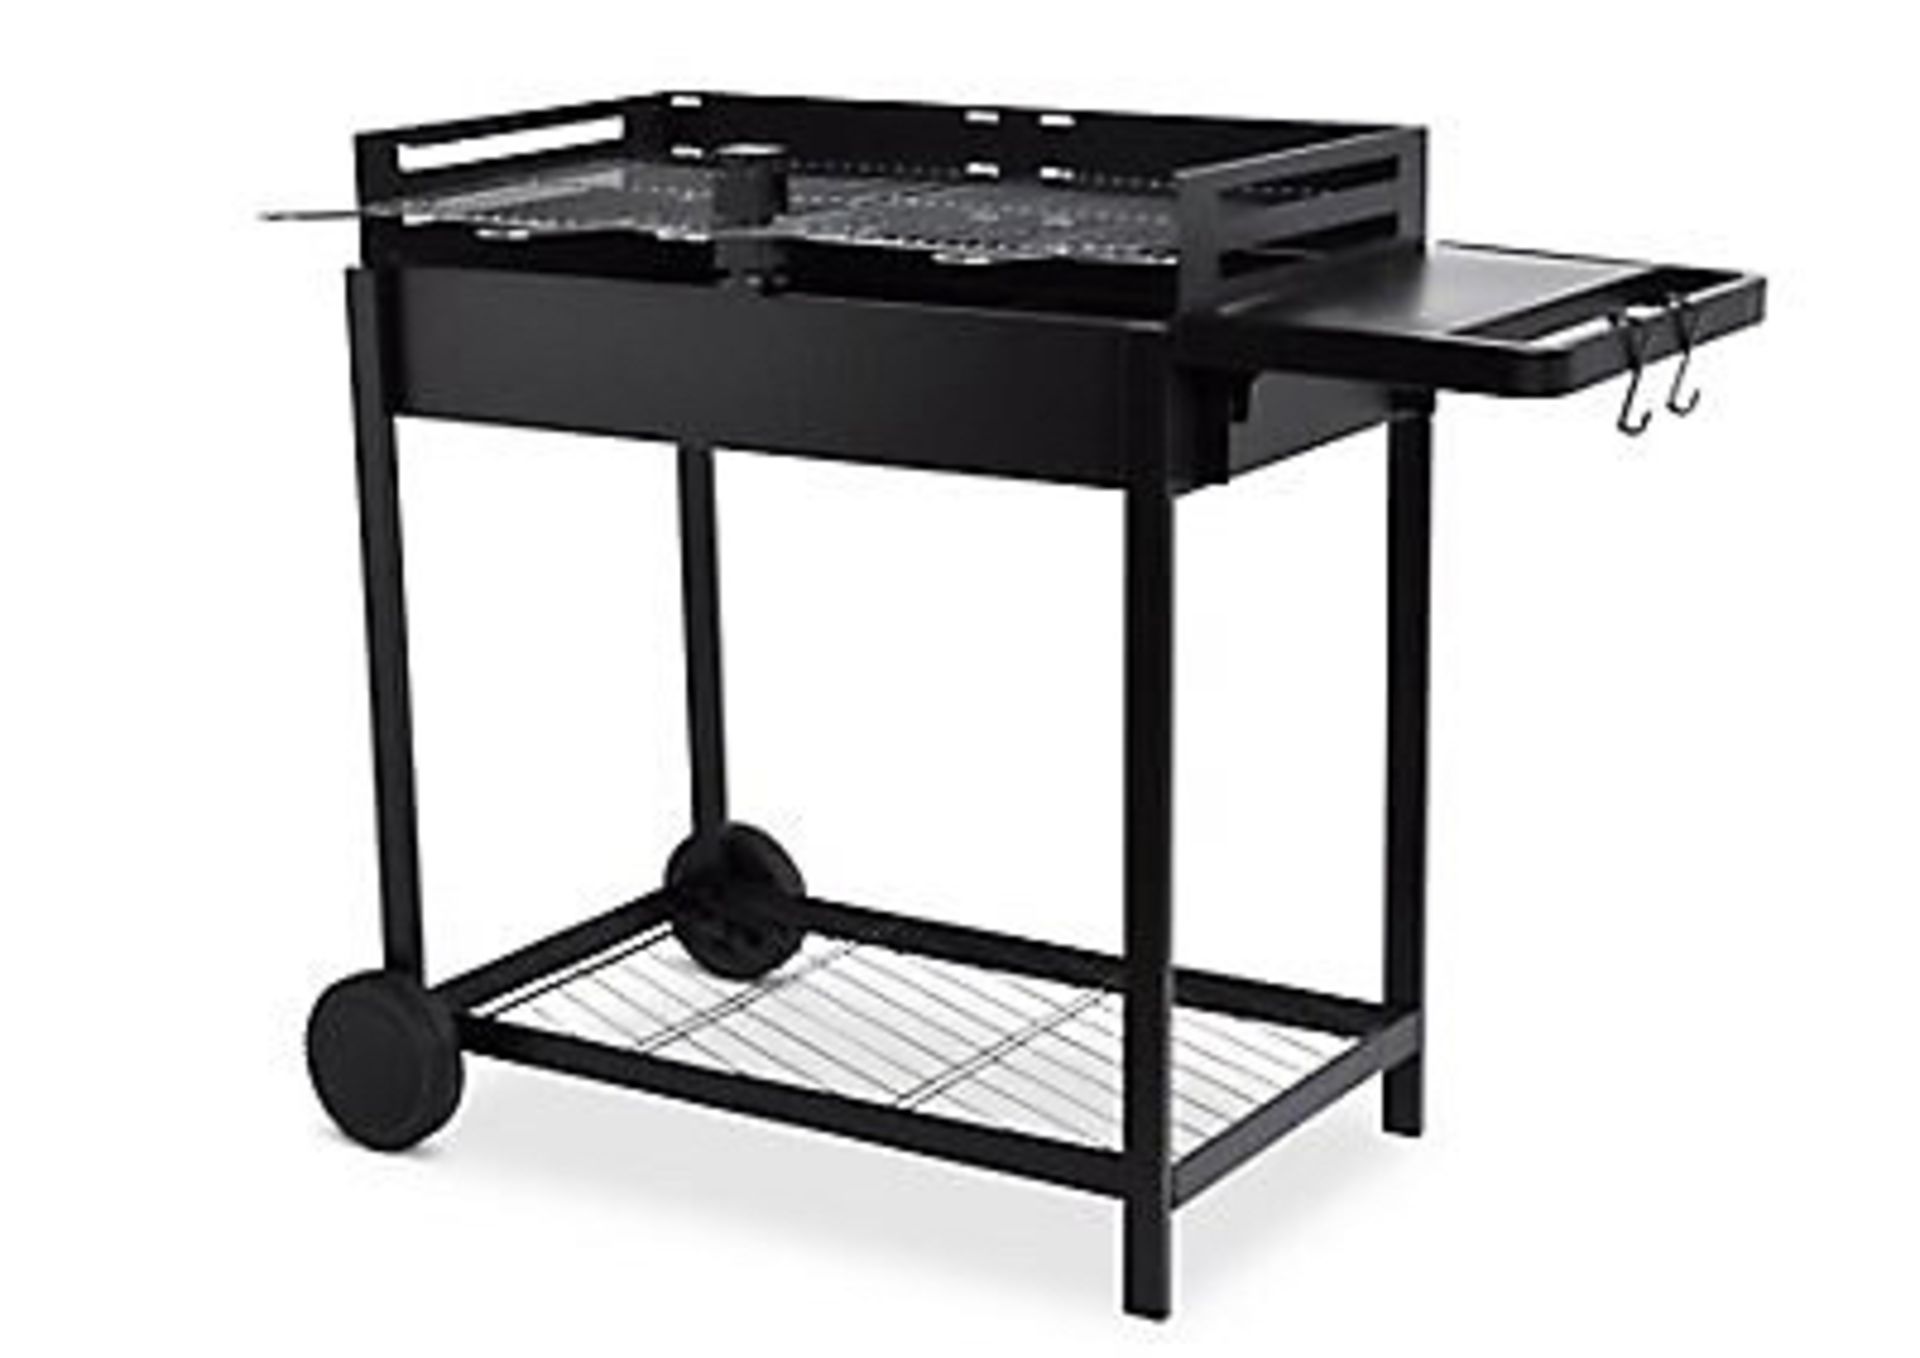 Zelfo BBQ Barbecue Grill with Stands - Brand New & Boxed - Image 2 of 7